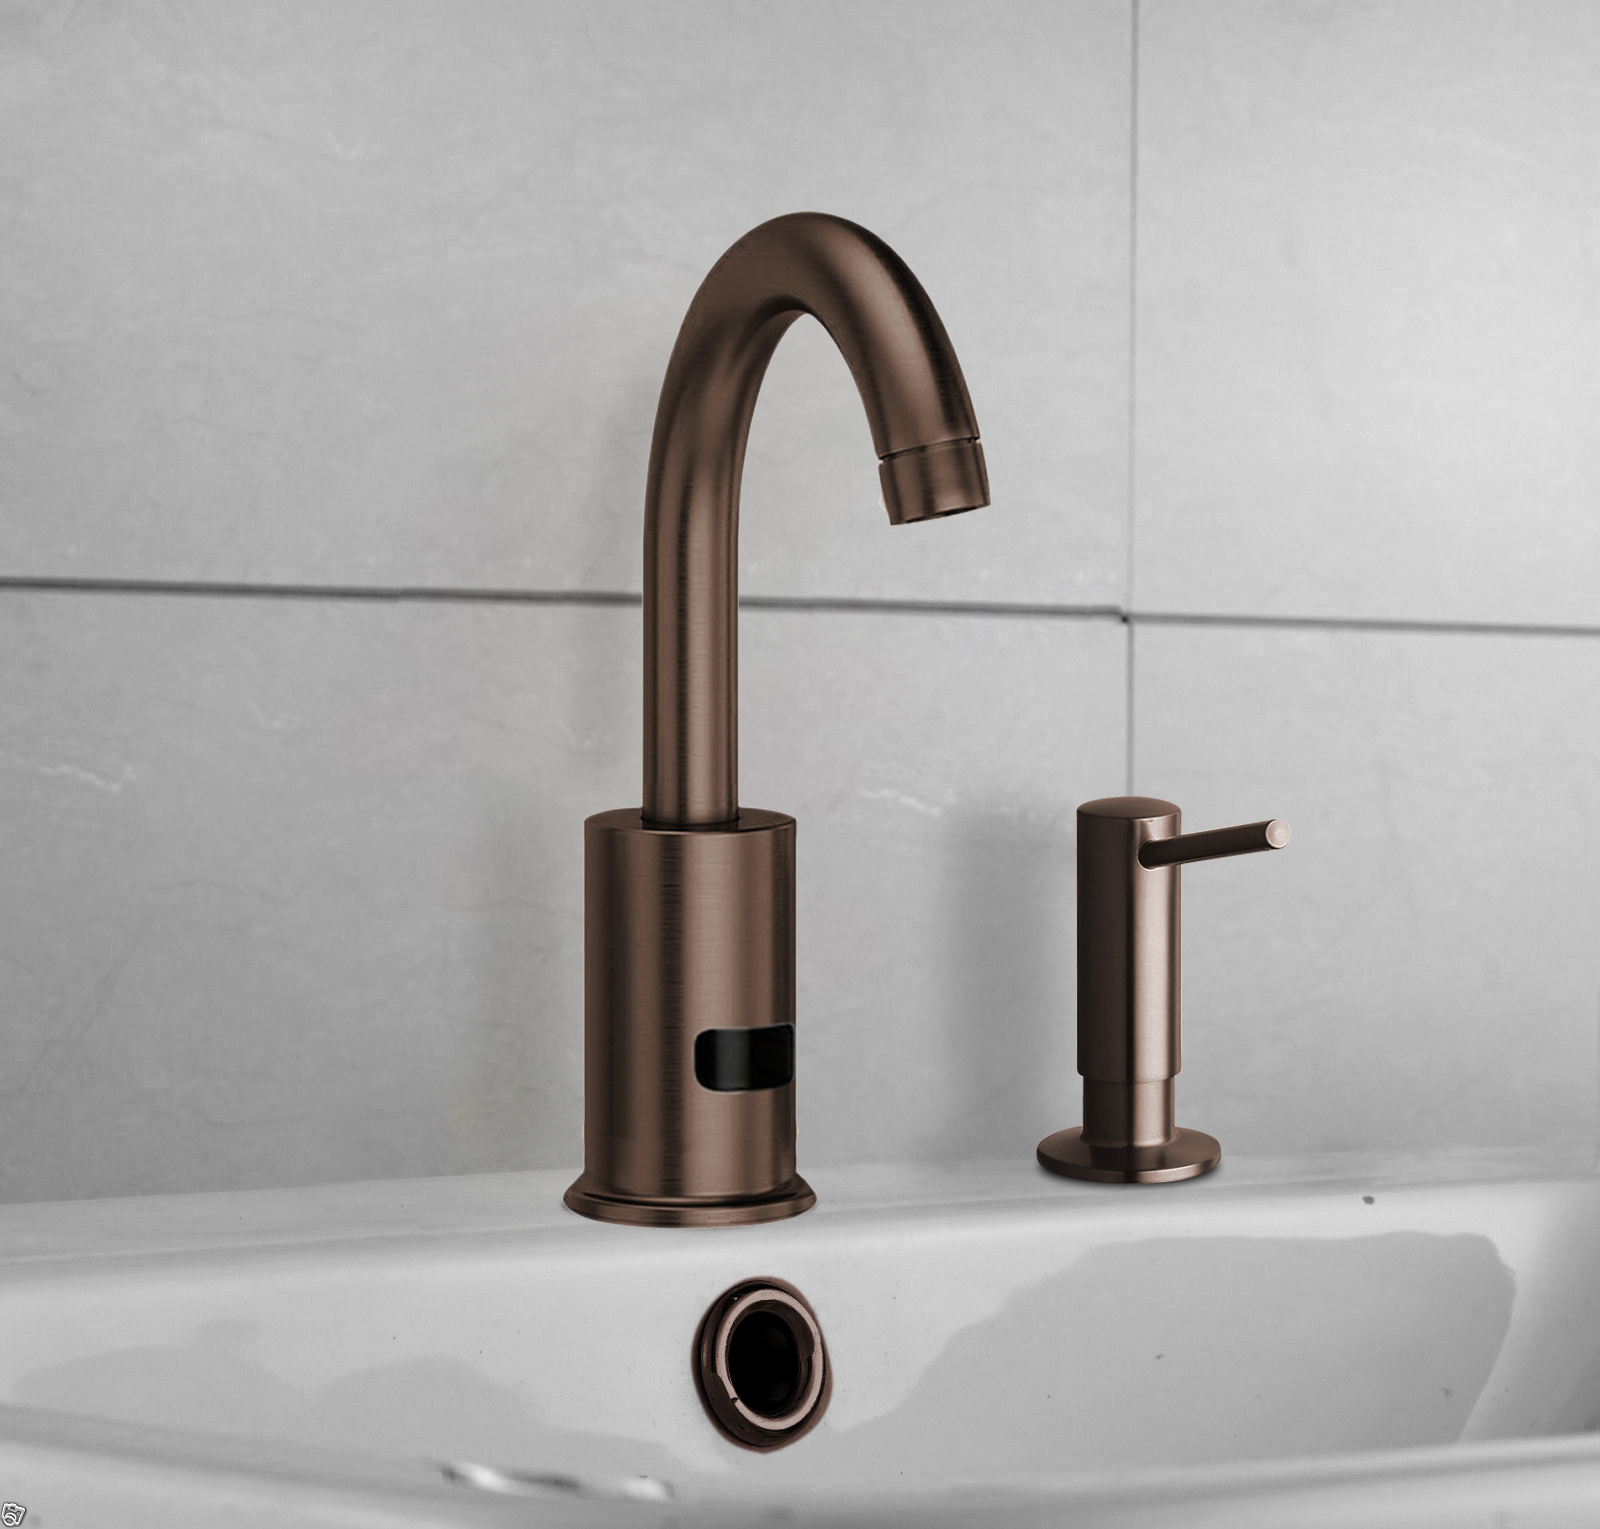 Fontana-Commercial-LORB-Touchless-Faucet